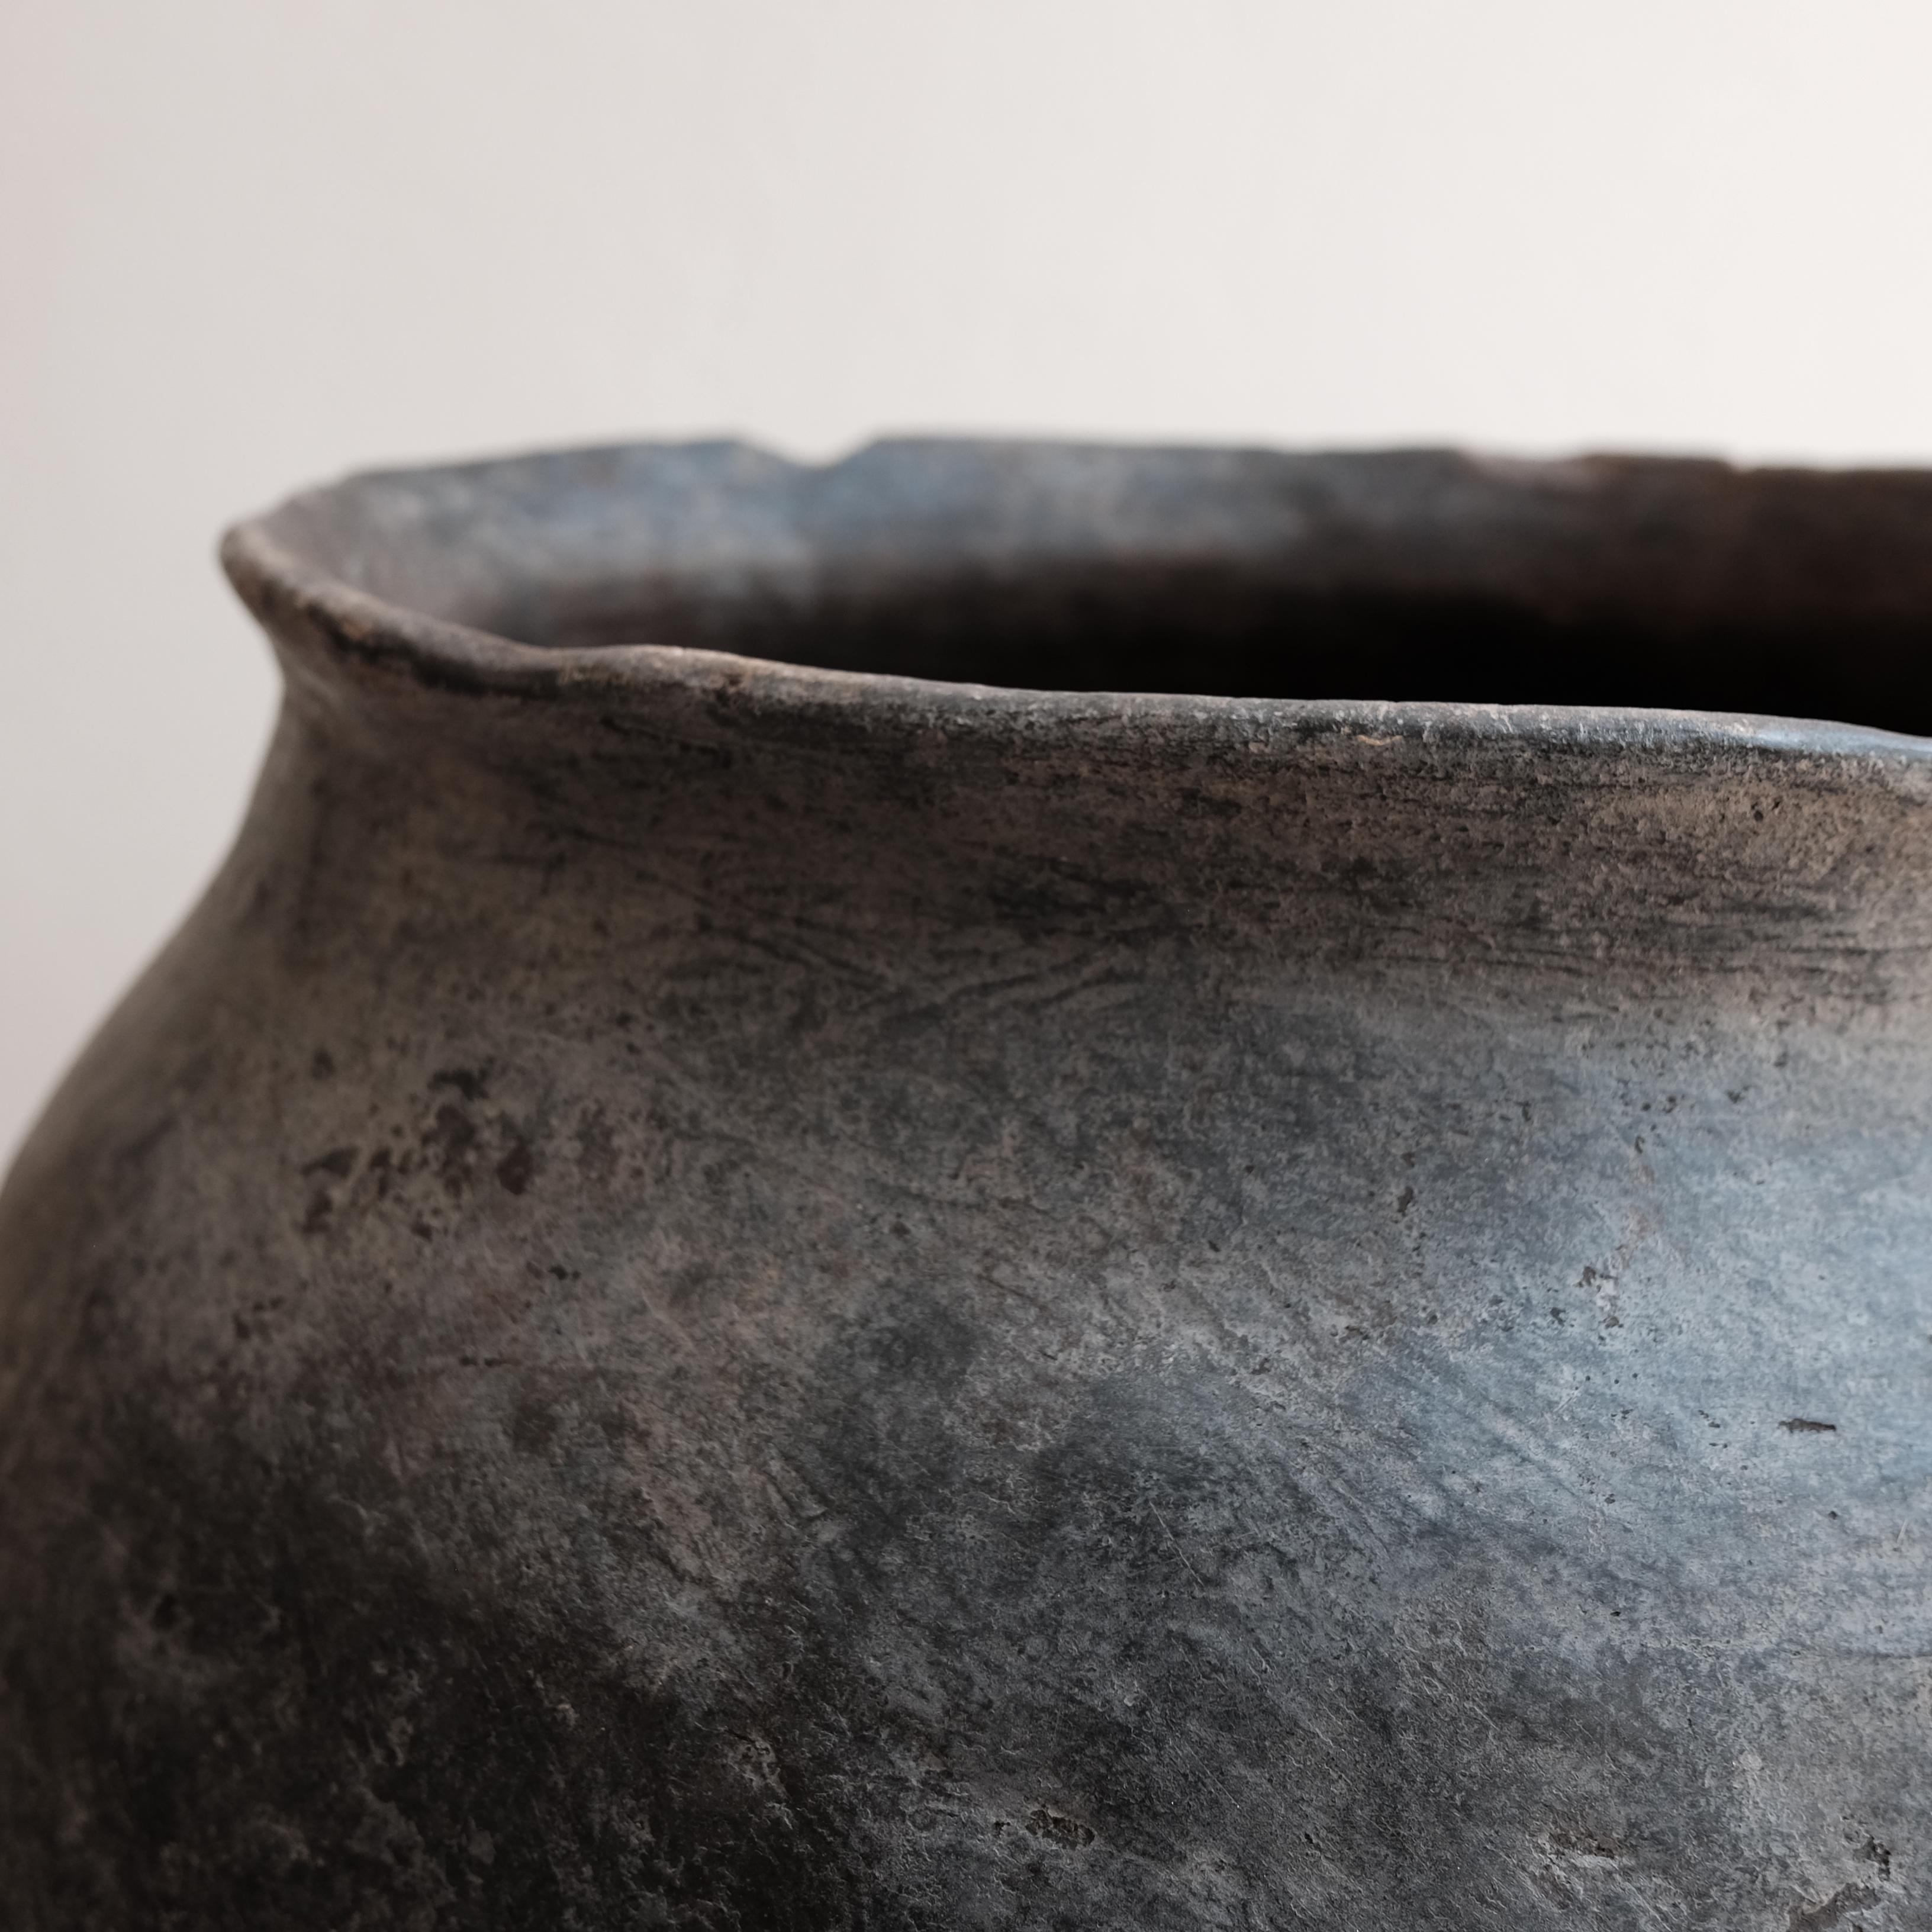 Mexican Primitive Styled Pot from Oaxaca